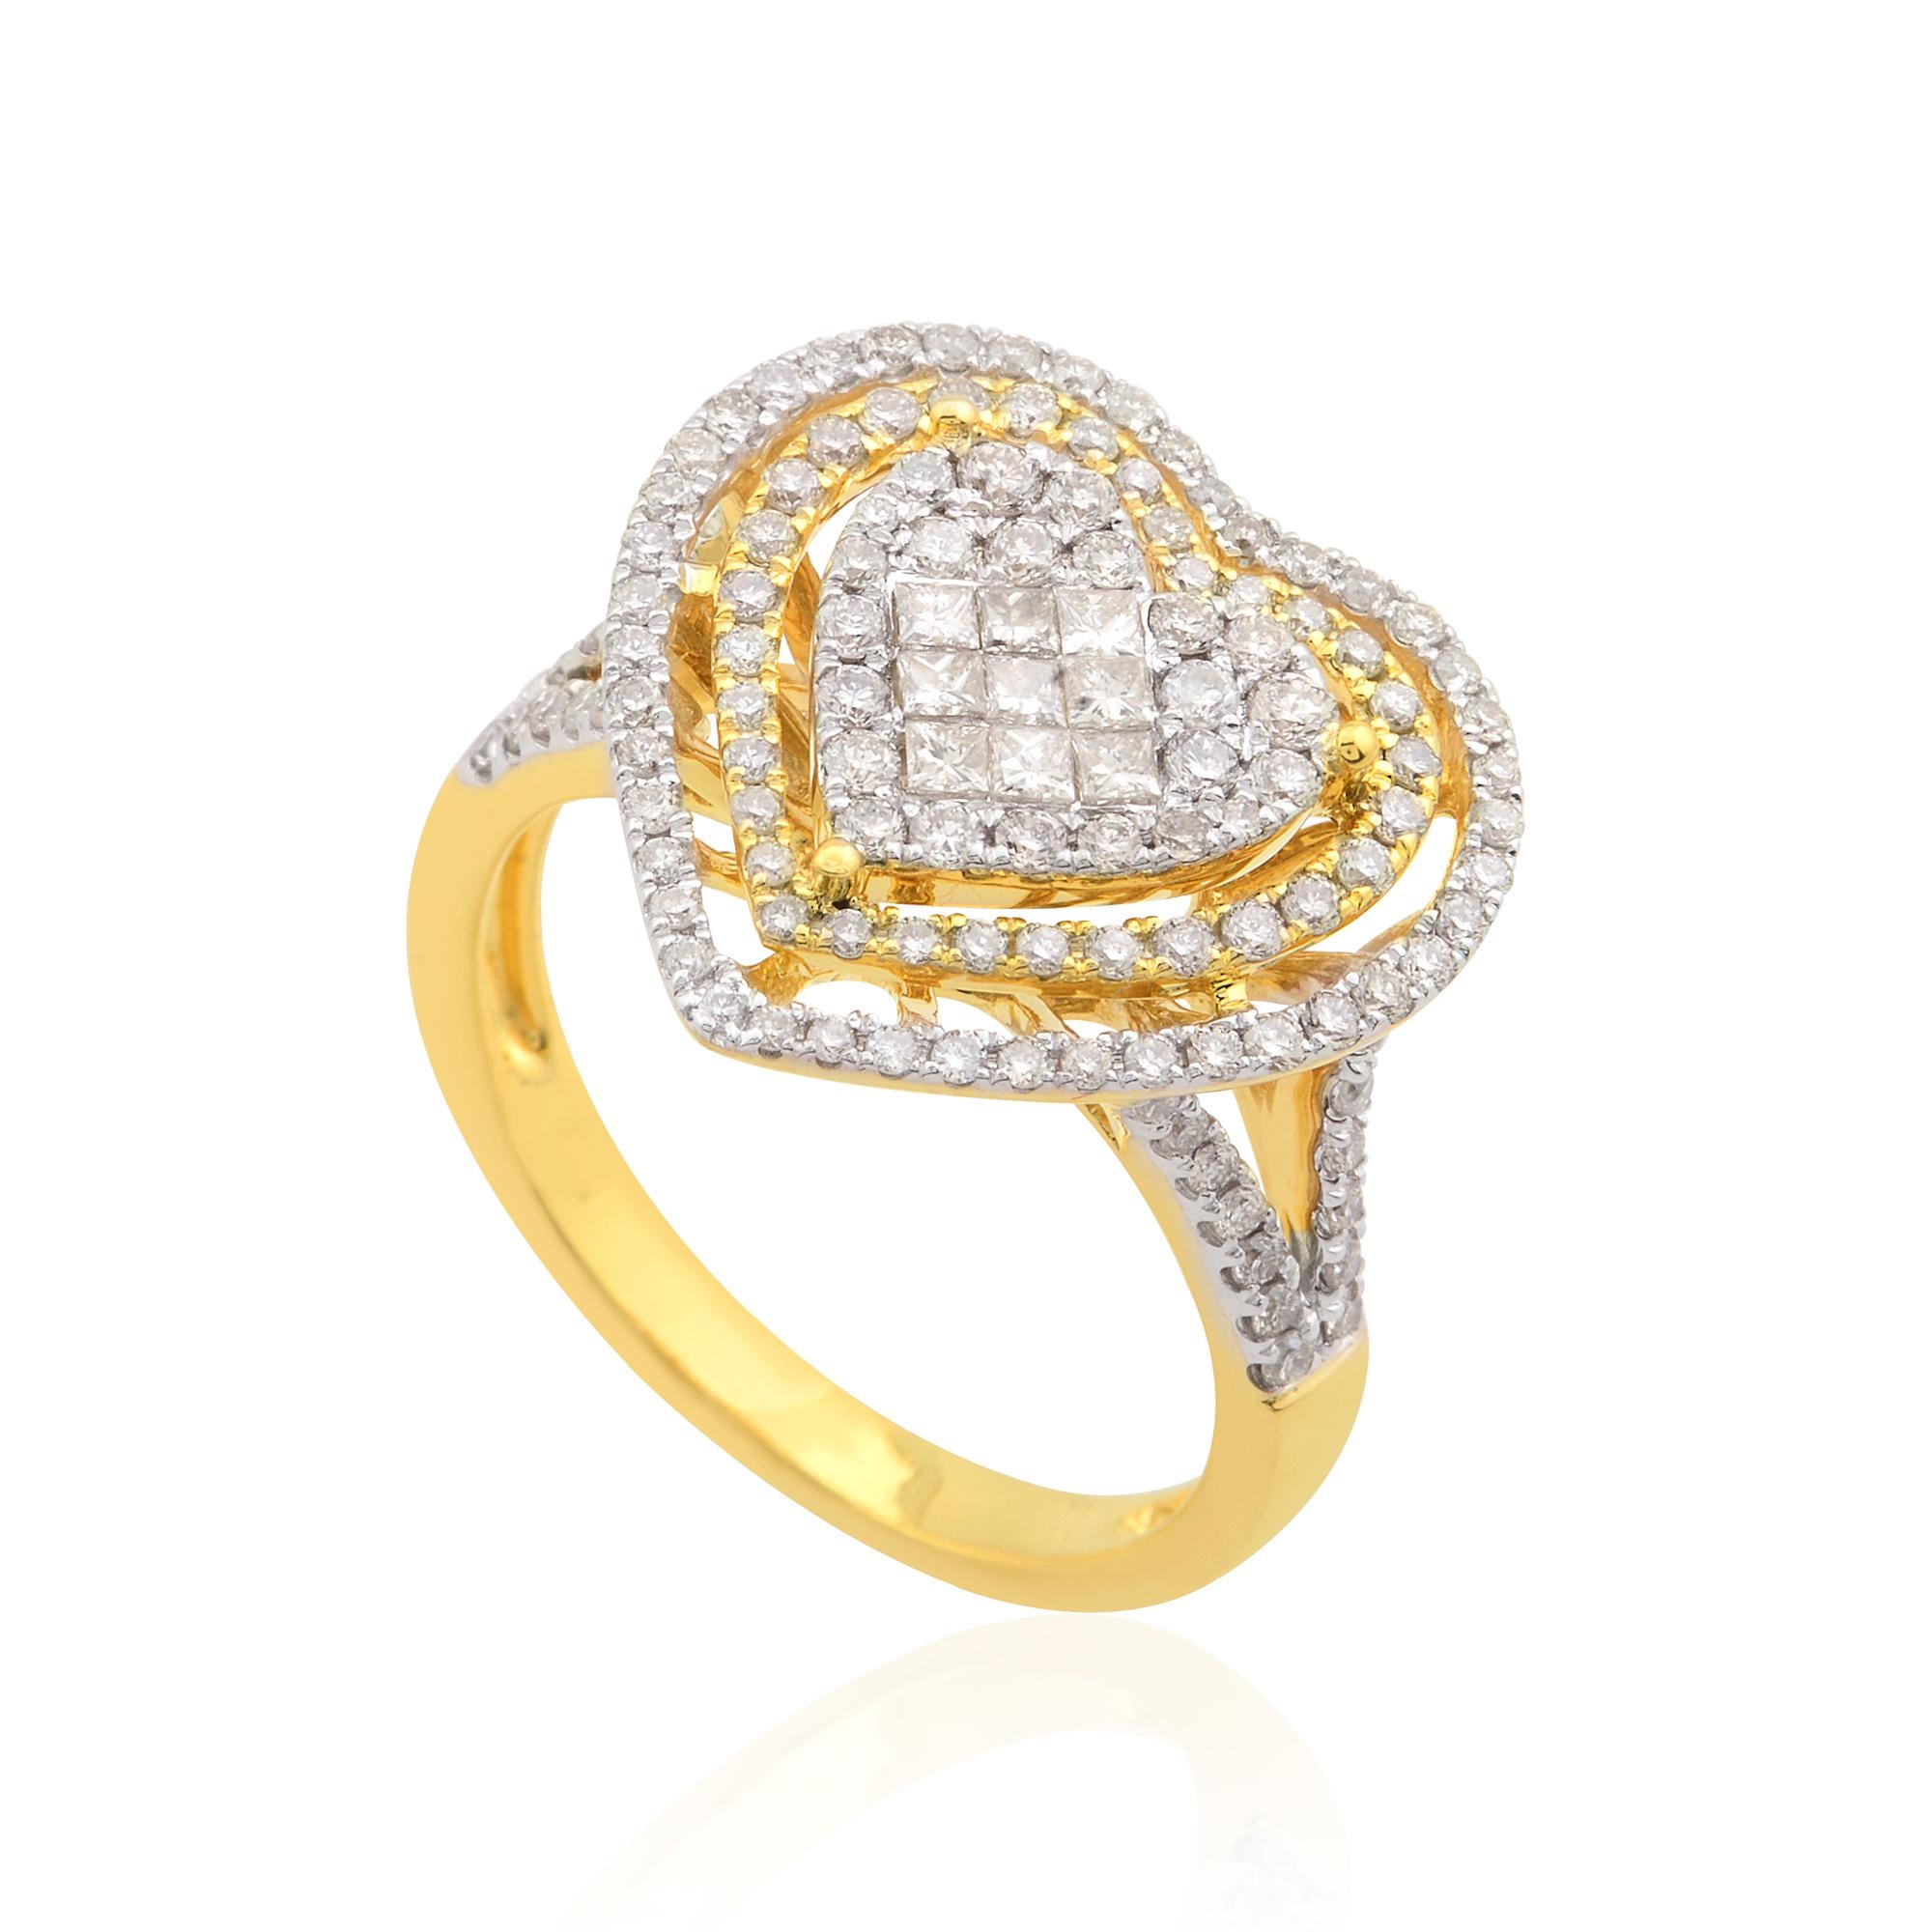 For Sale:  1.30 Carat SI Clarity HI Color Diamond Pave Heart Ring 18k Yellow Gold Jewelry 2